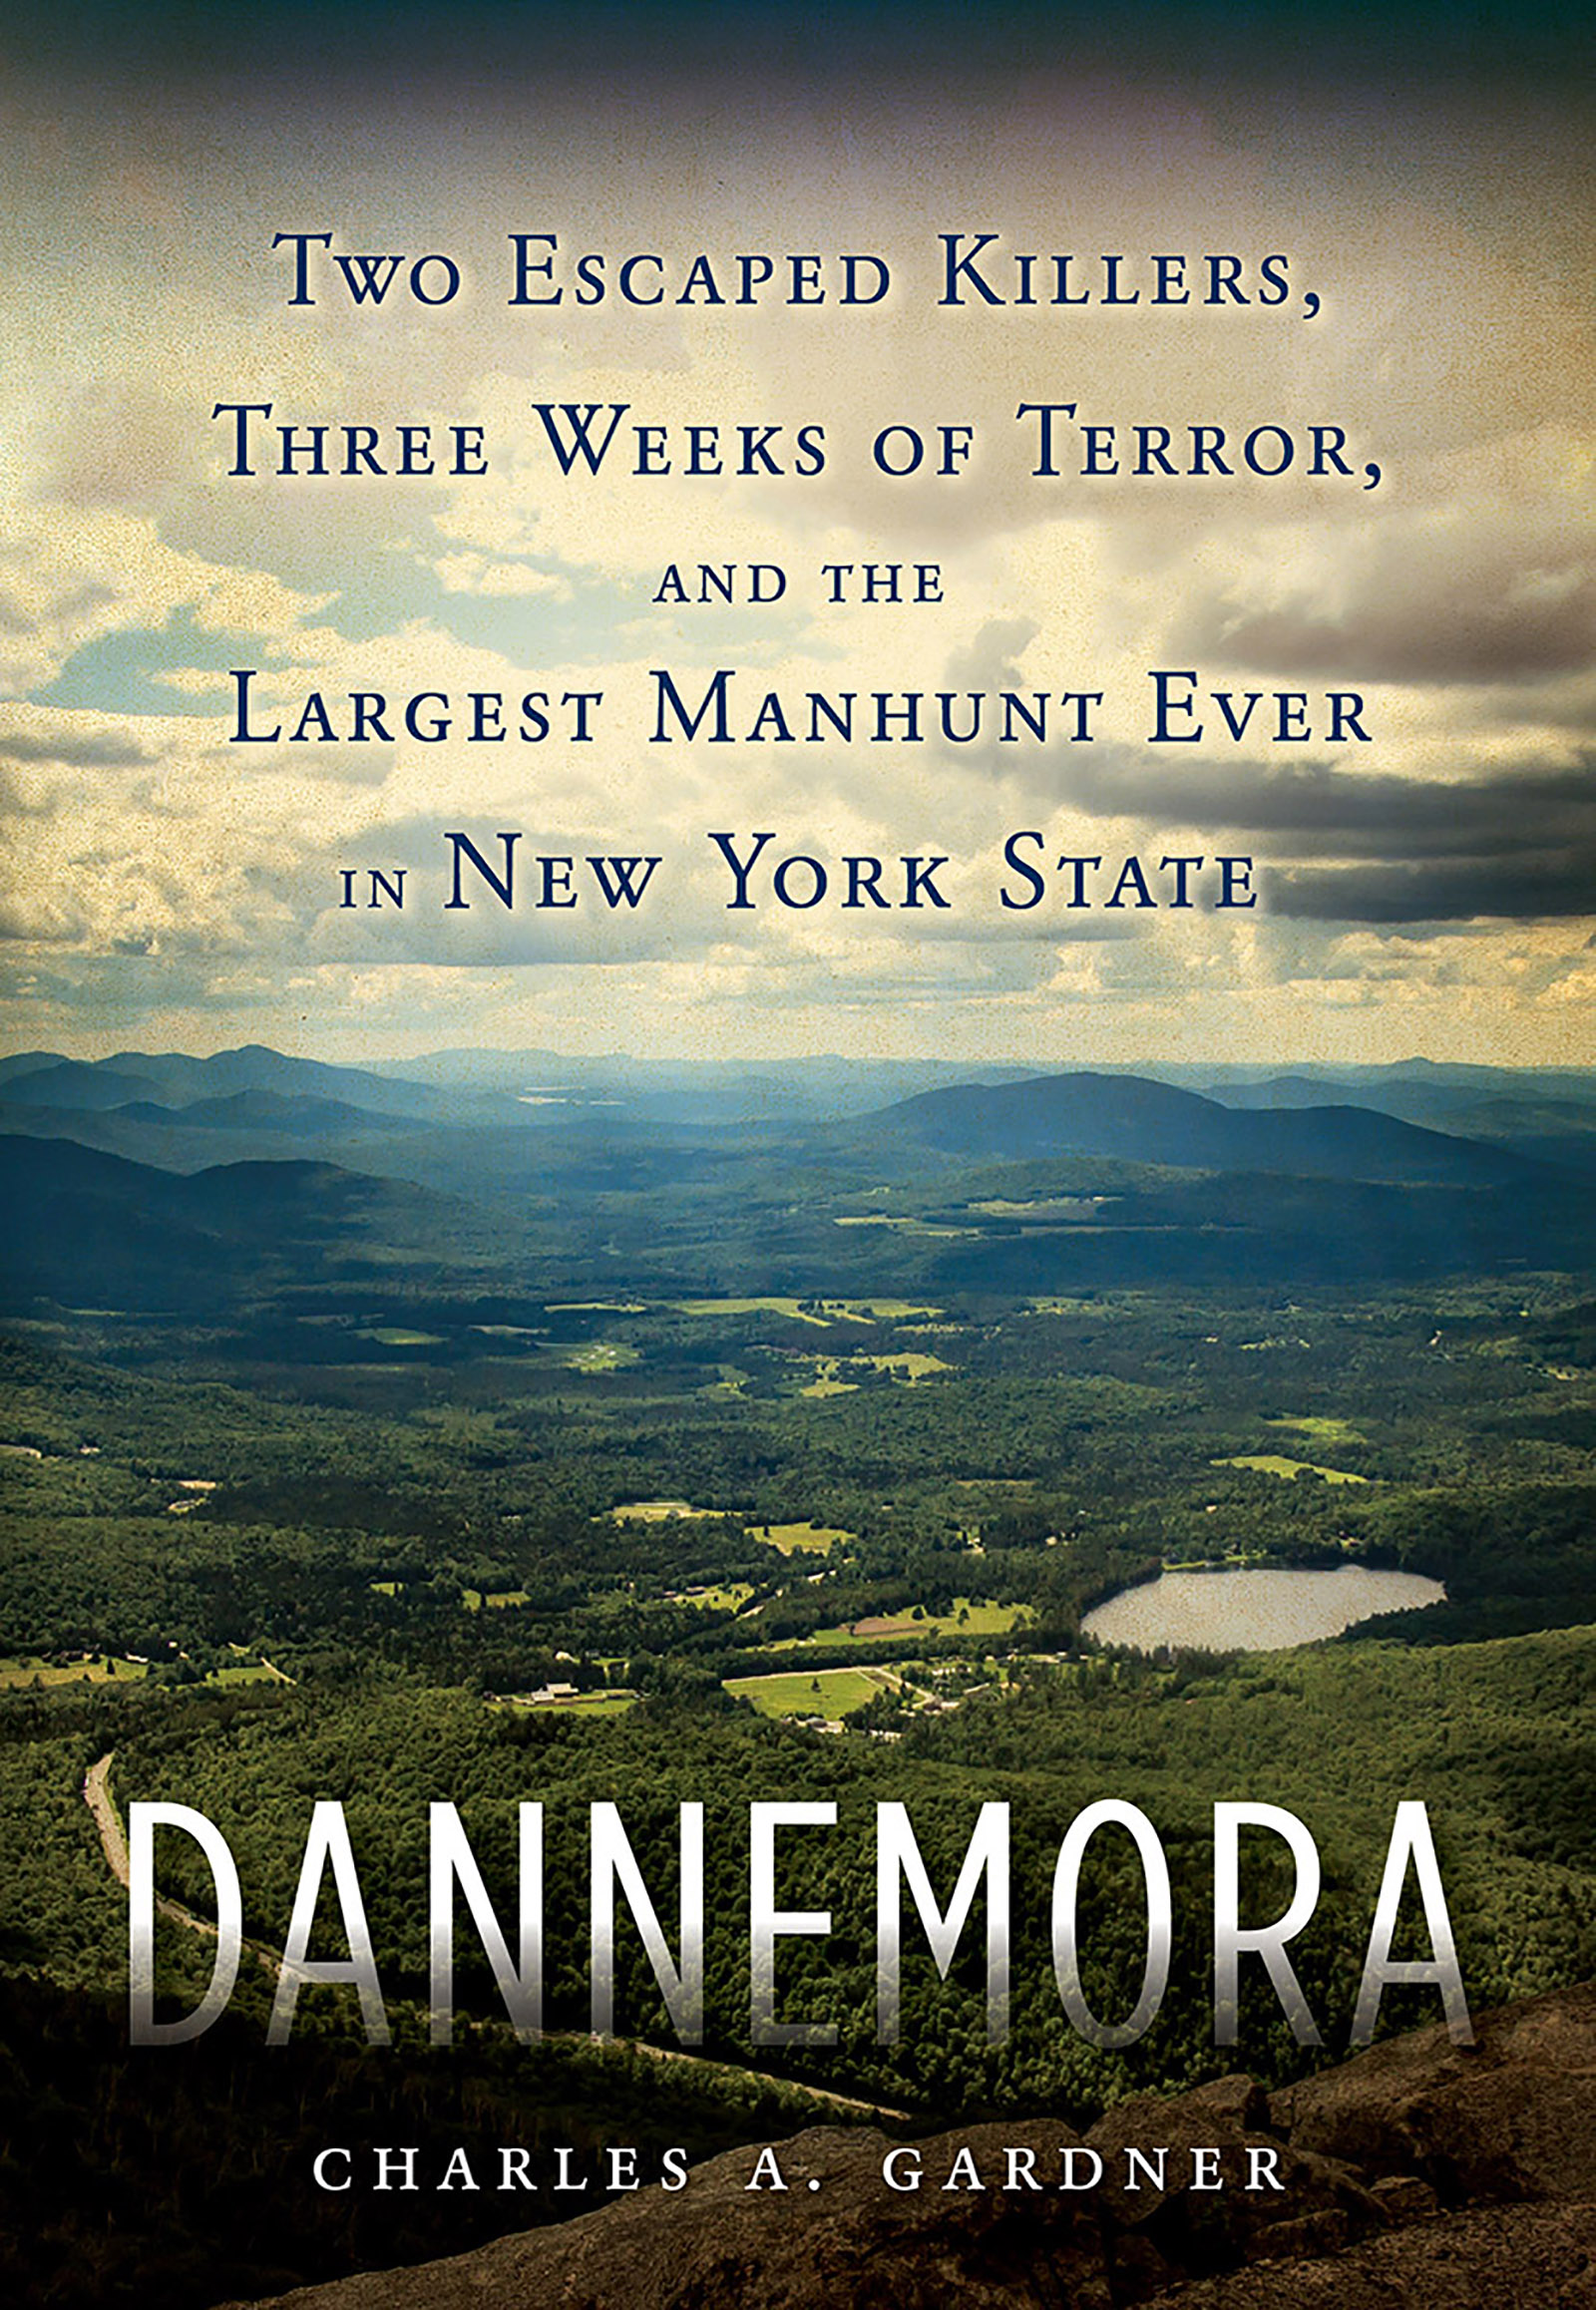 Umschlagbild für Dannemora [electronic resource] : Two Escaped Killers, Three Weeks of Terror, and the Largest Manhunt Ever in New York State